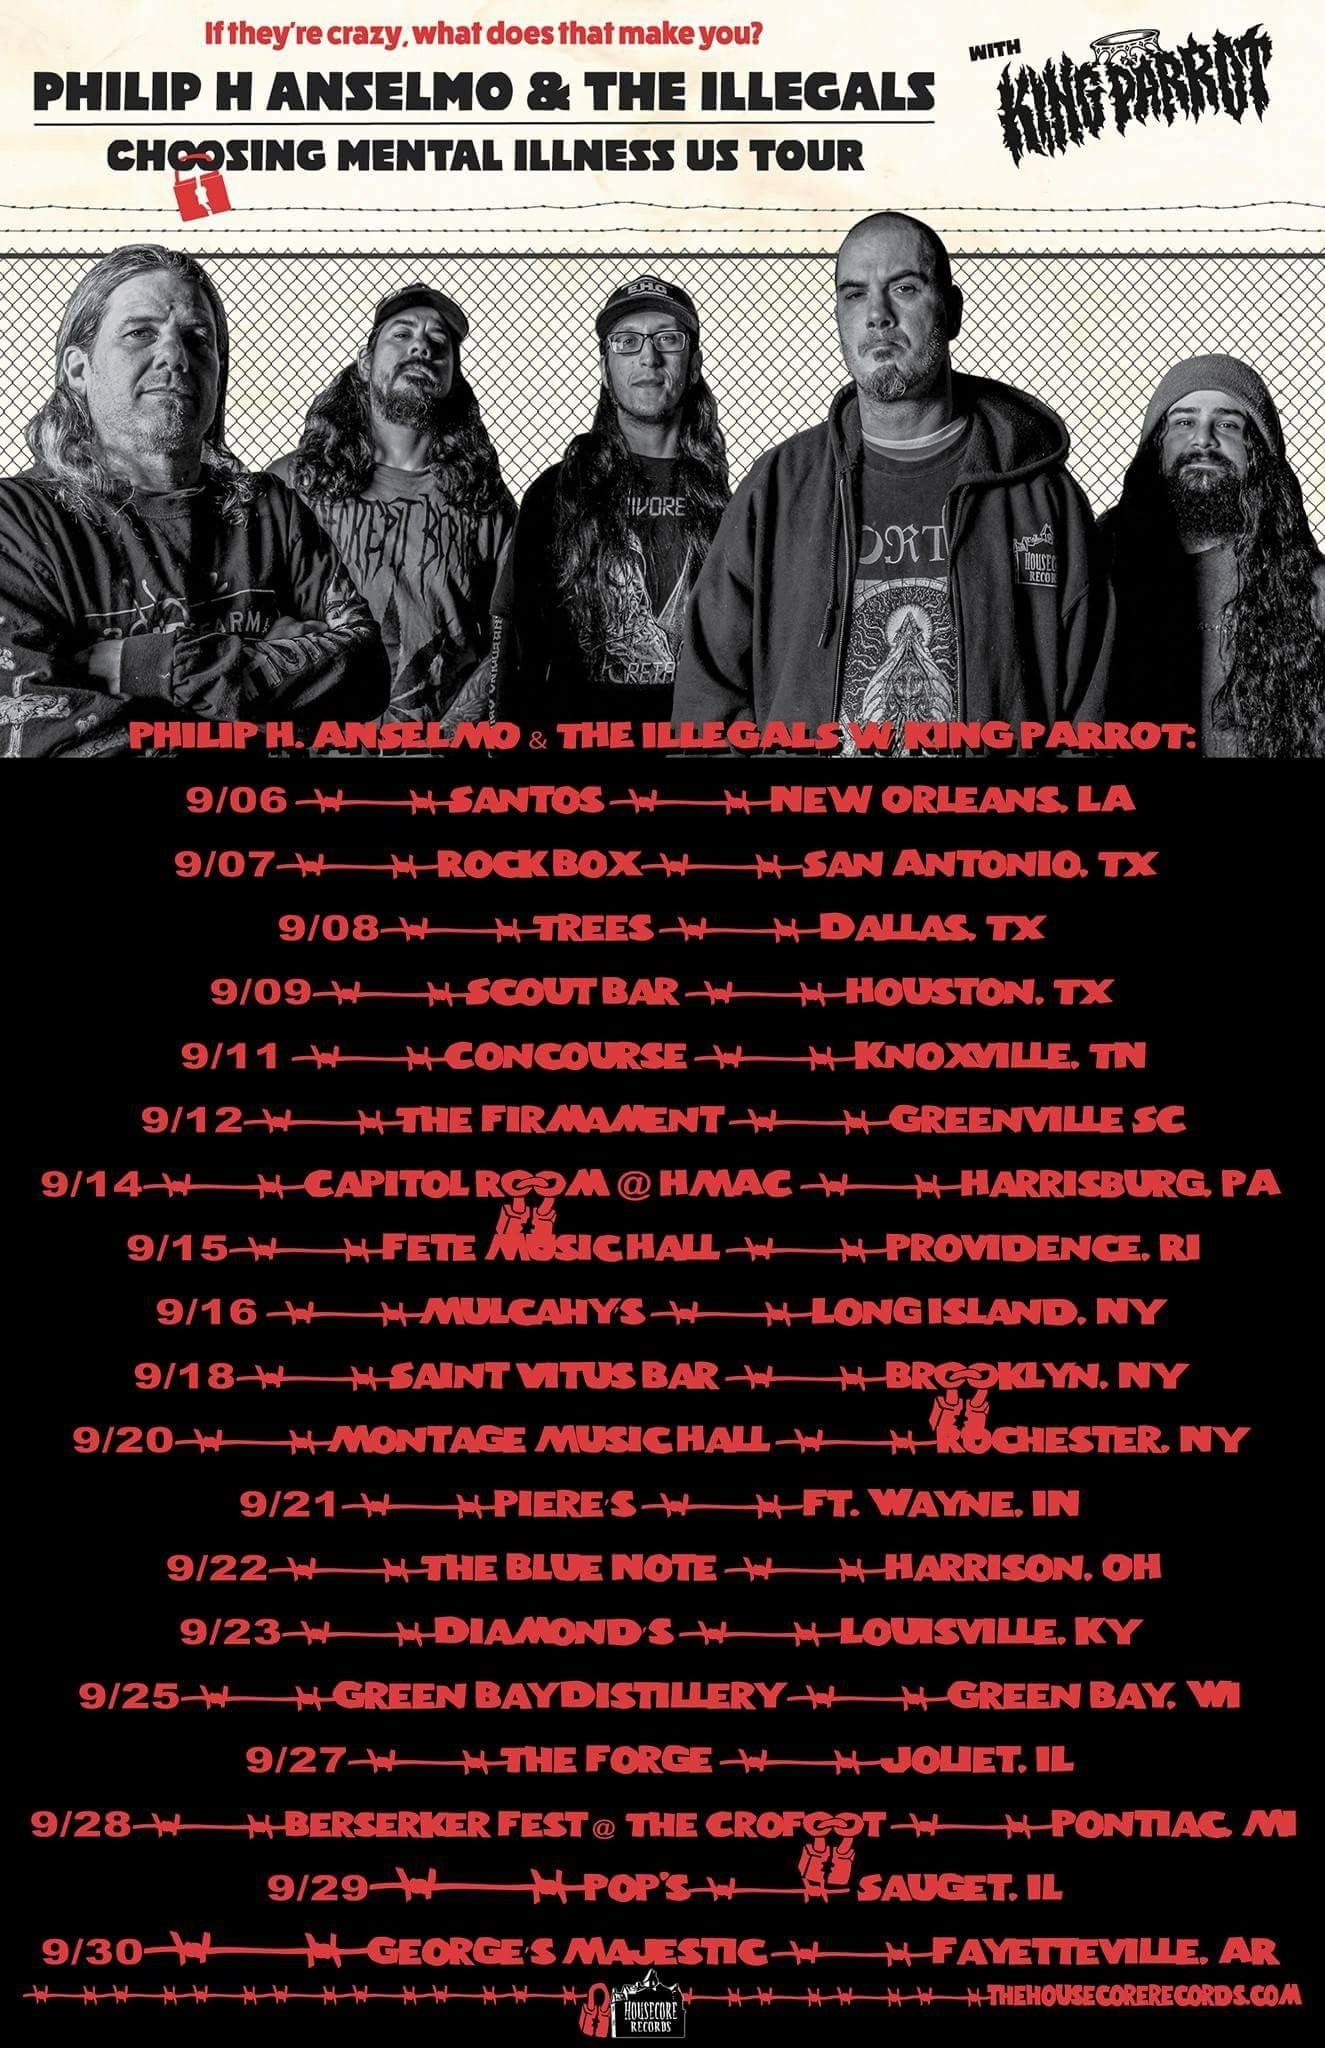 New Orleans with Philip H. Anselmo and The Illegals